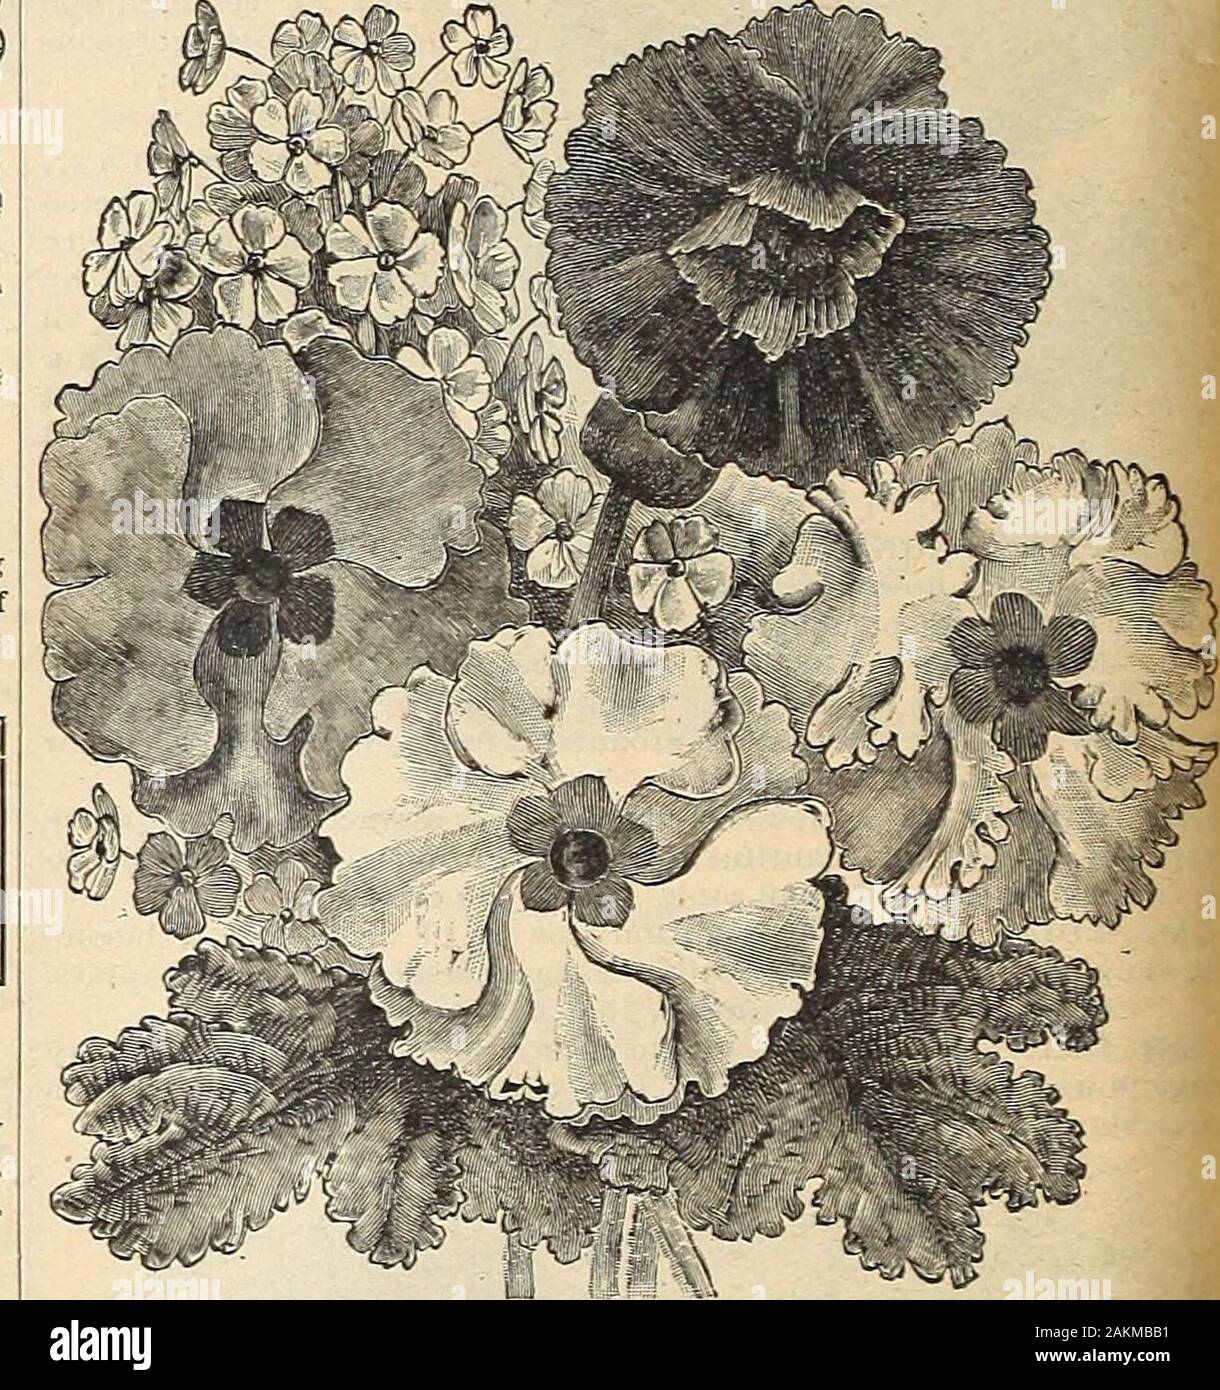 The Maule seed book : 1917 . PRIMULA (Primrose) Hardy Perennial AViU stand the winter with a slight protection. Admirably suited torockeries as well as for naturalizing by the edge of streams. 1700 JAPONICA OR JAPANESE PRIMROSE. Perfectly hardyand forming robust, stately plants bearing their bright and showyflowers in whorls on stems 6 to 9 Inches long. Mixed colors. Pkt., 10c. 1701 AURICULA. Large flowers borne in umbels, with a varietj ofrich colors. Extremely free bloomer and a favorite. Packet, 10 cts. 1702 POLYANTHUS, SINGLE, ALL COLORS. Showy perennial,blooming in early spring. Pot or ou Stock Photo